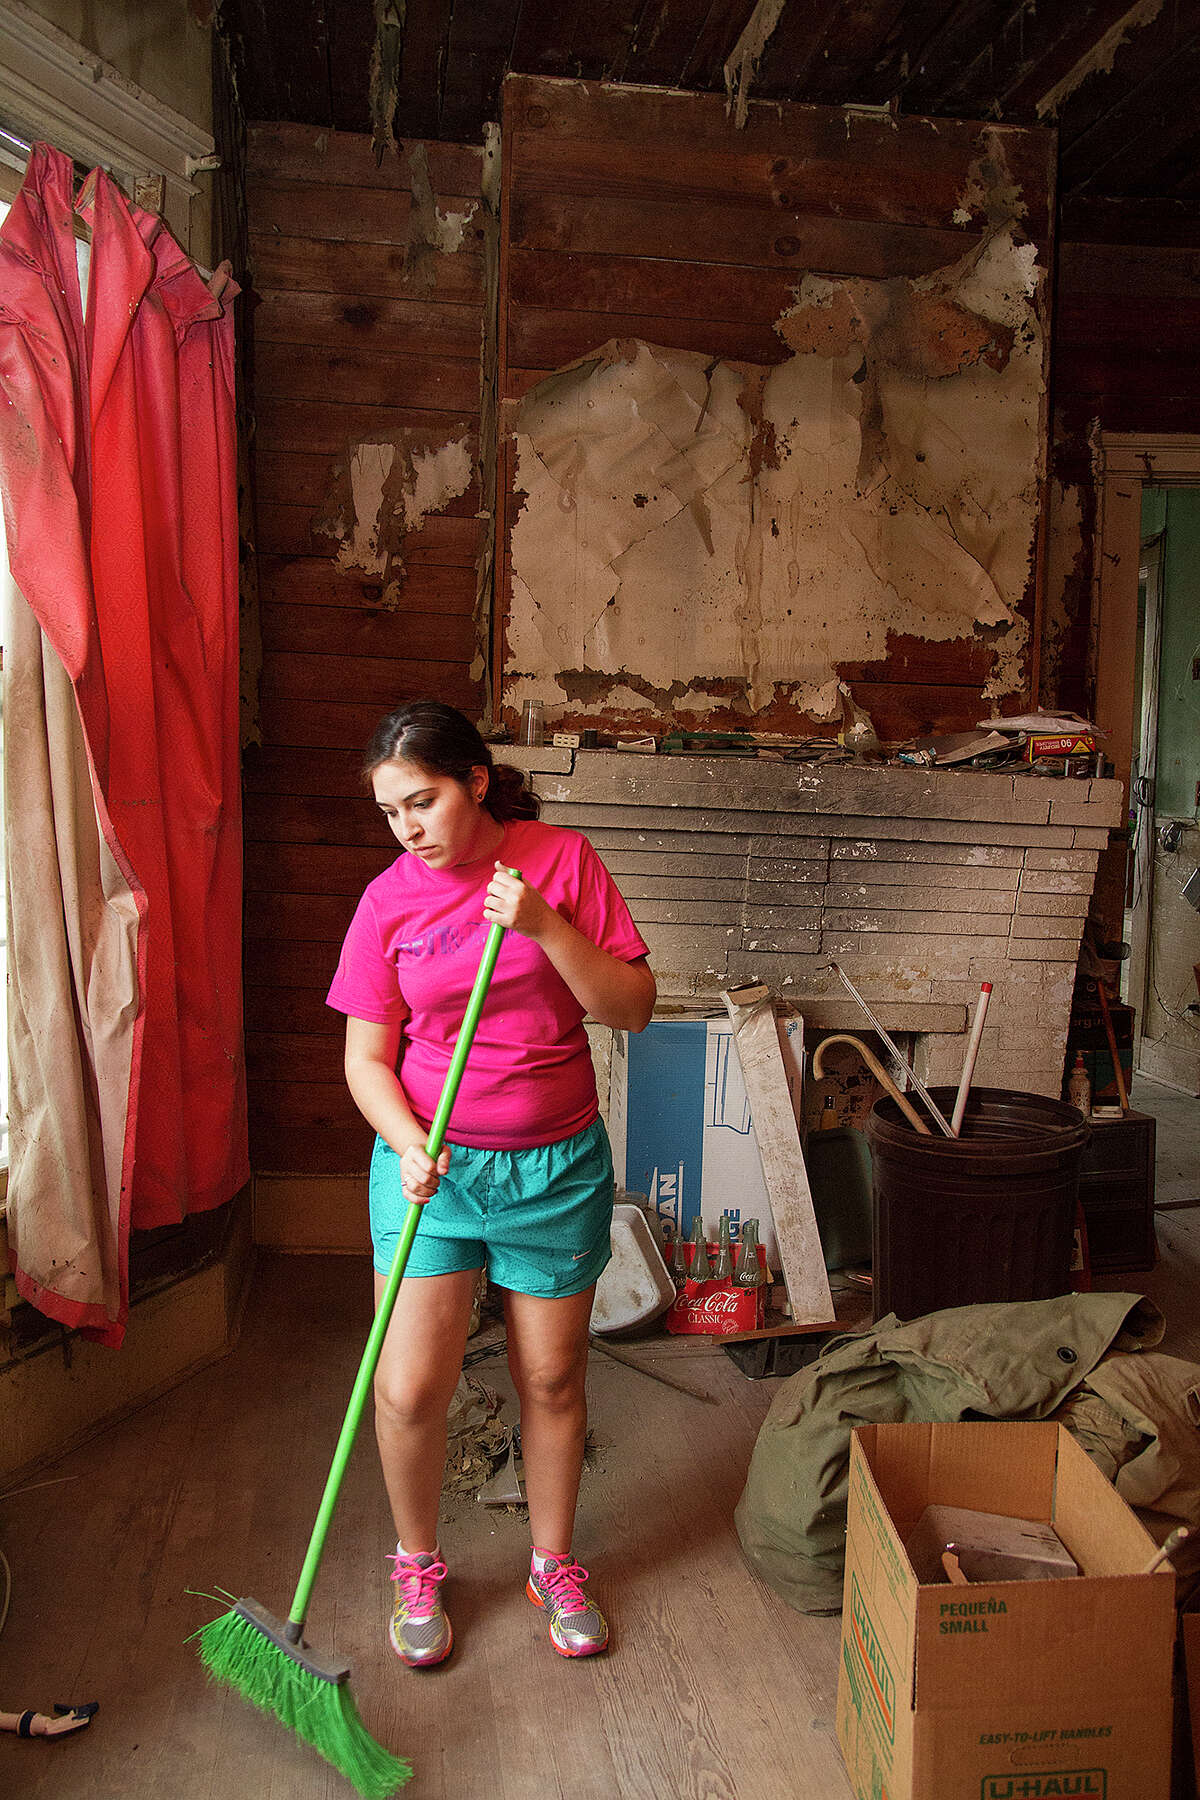 Megan Lenz helps clean up Miguel Calzada's home, Saturday, Dec. 13, 2014 so they can move forward with renovations.